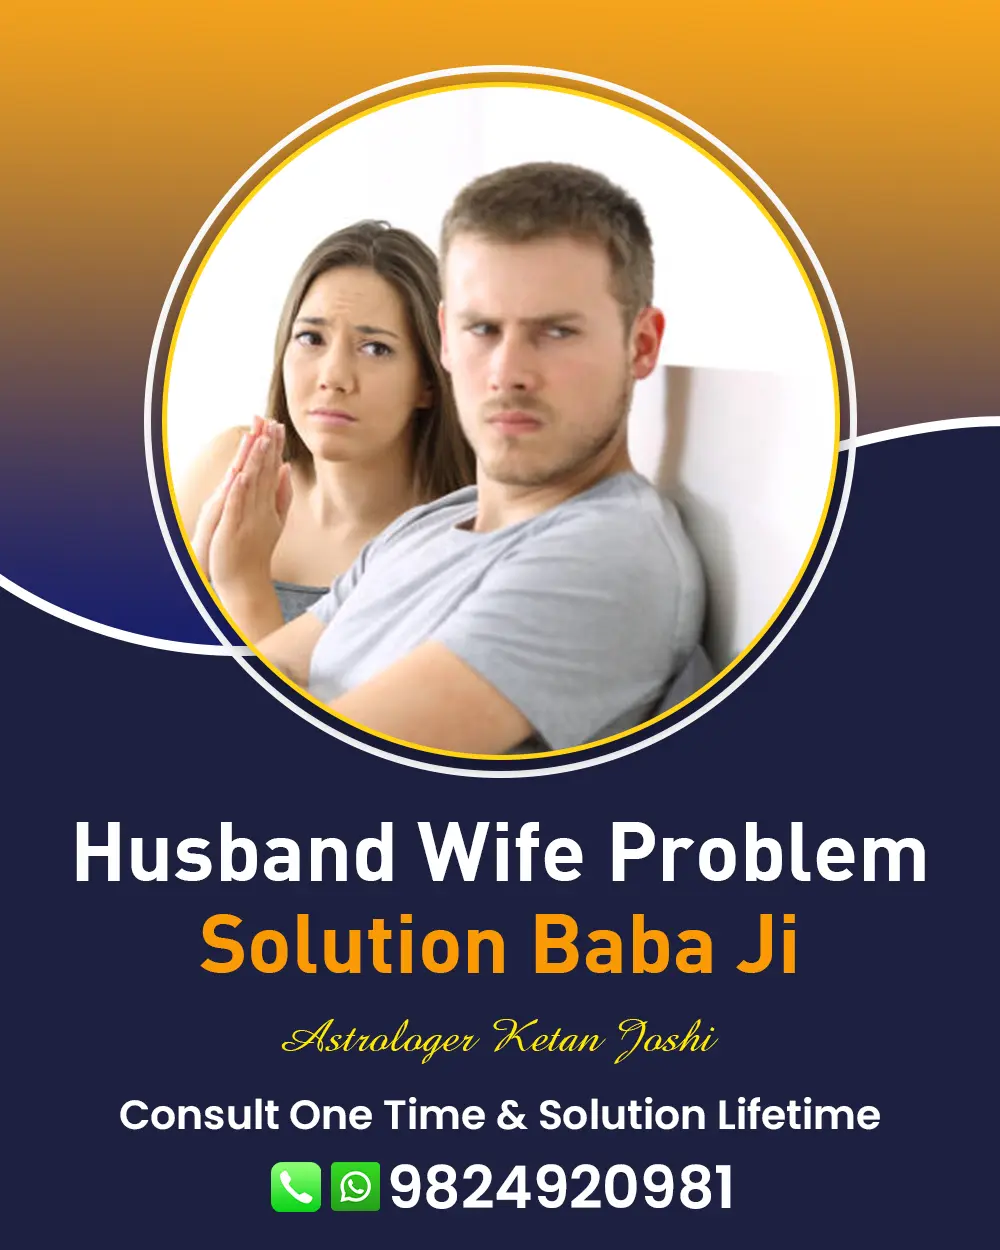 Husband Wife Problem Solution in Mansa